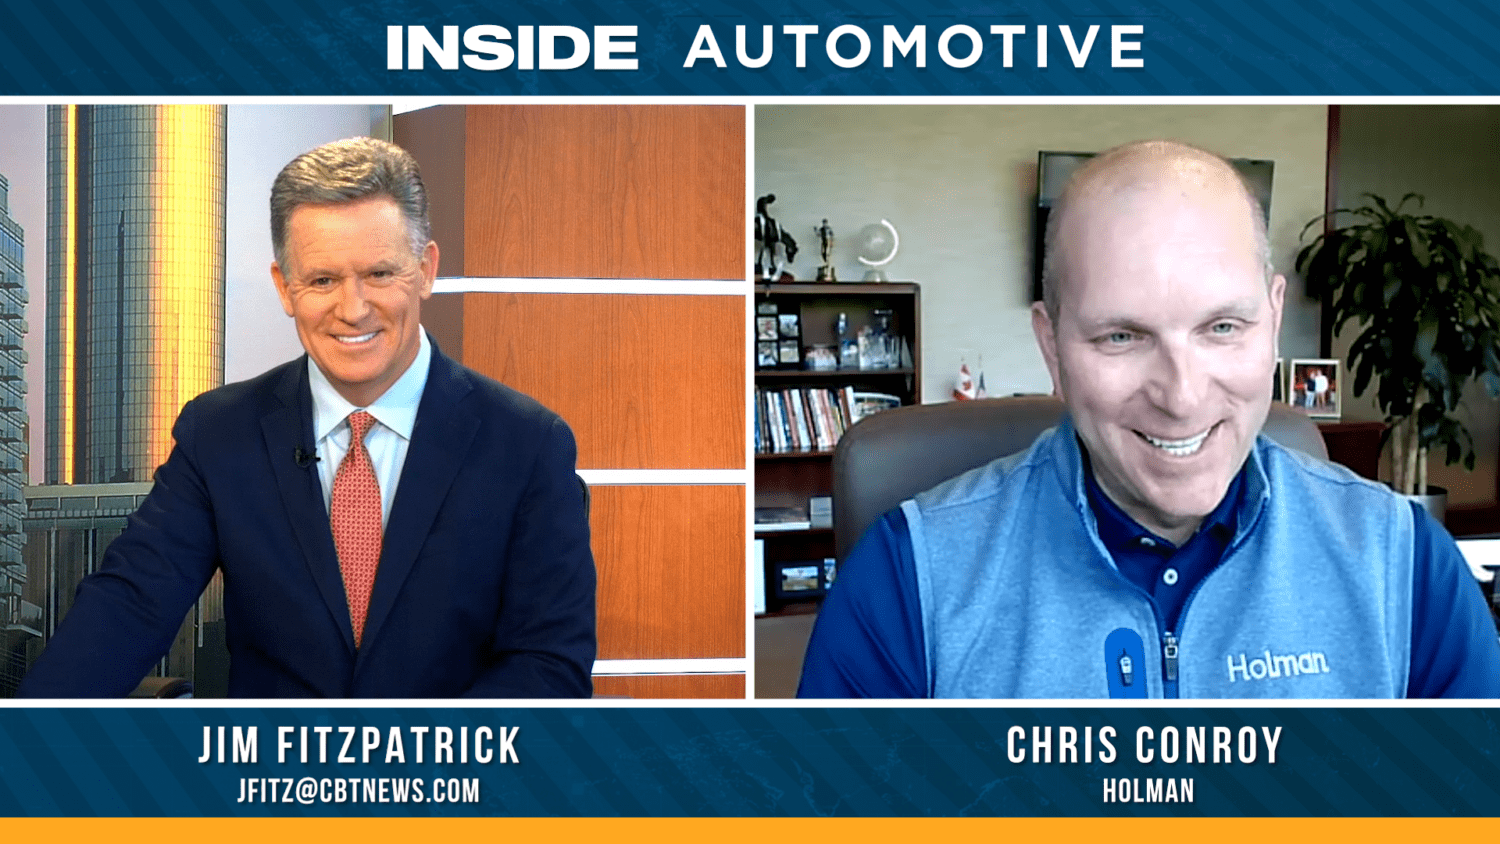 Holman recently expanded with the acquisition of Leith Automotive. Today's Inside Automotive, Chris Conroy joins us to discuss whats next.